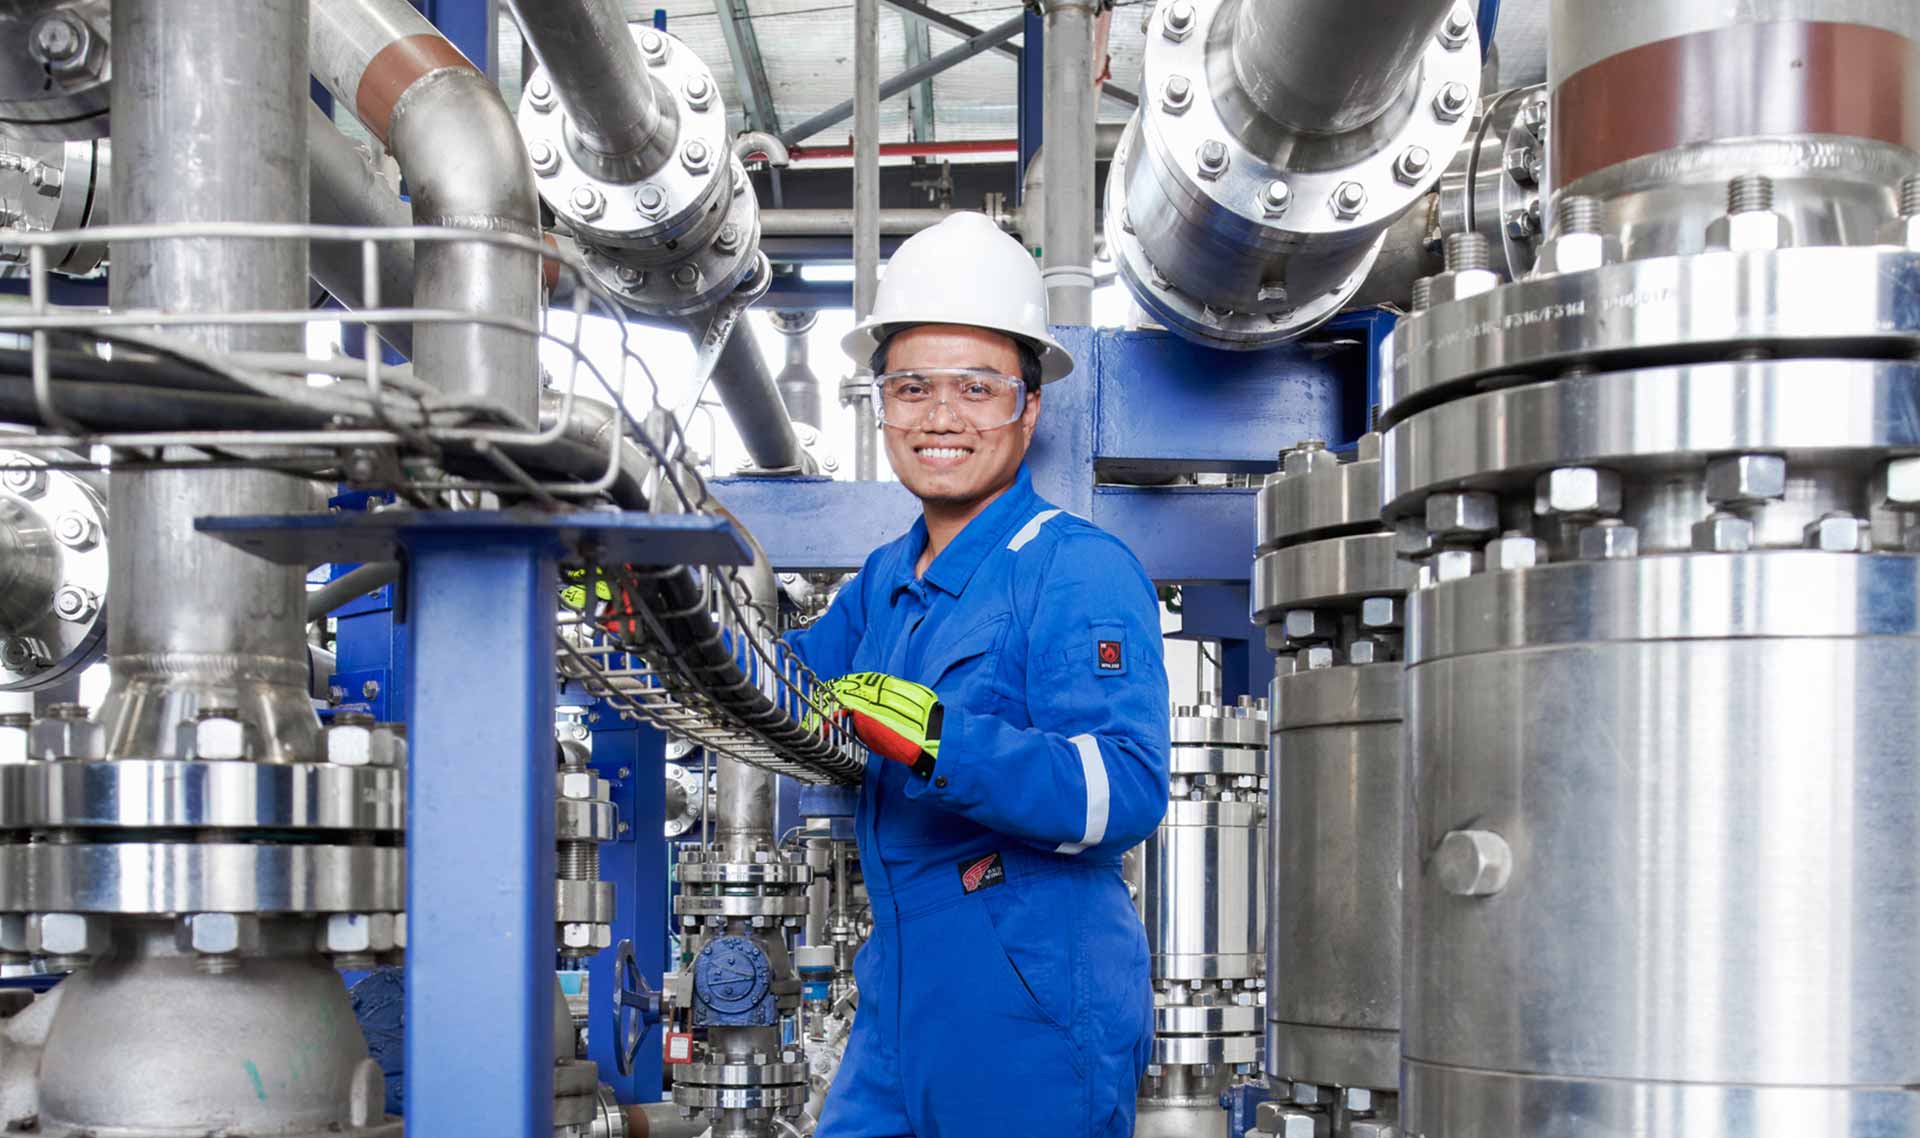 Engineer smiling among valves and machinery